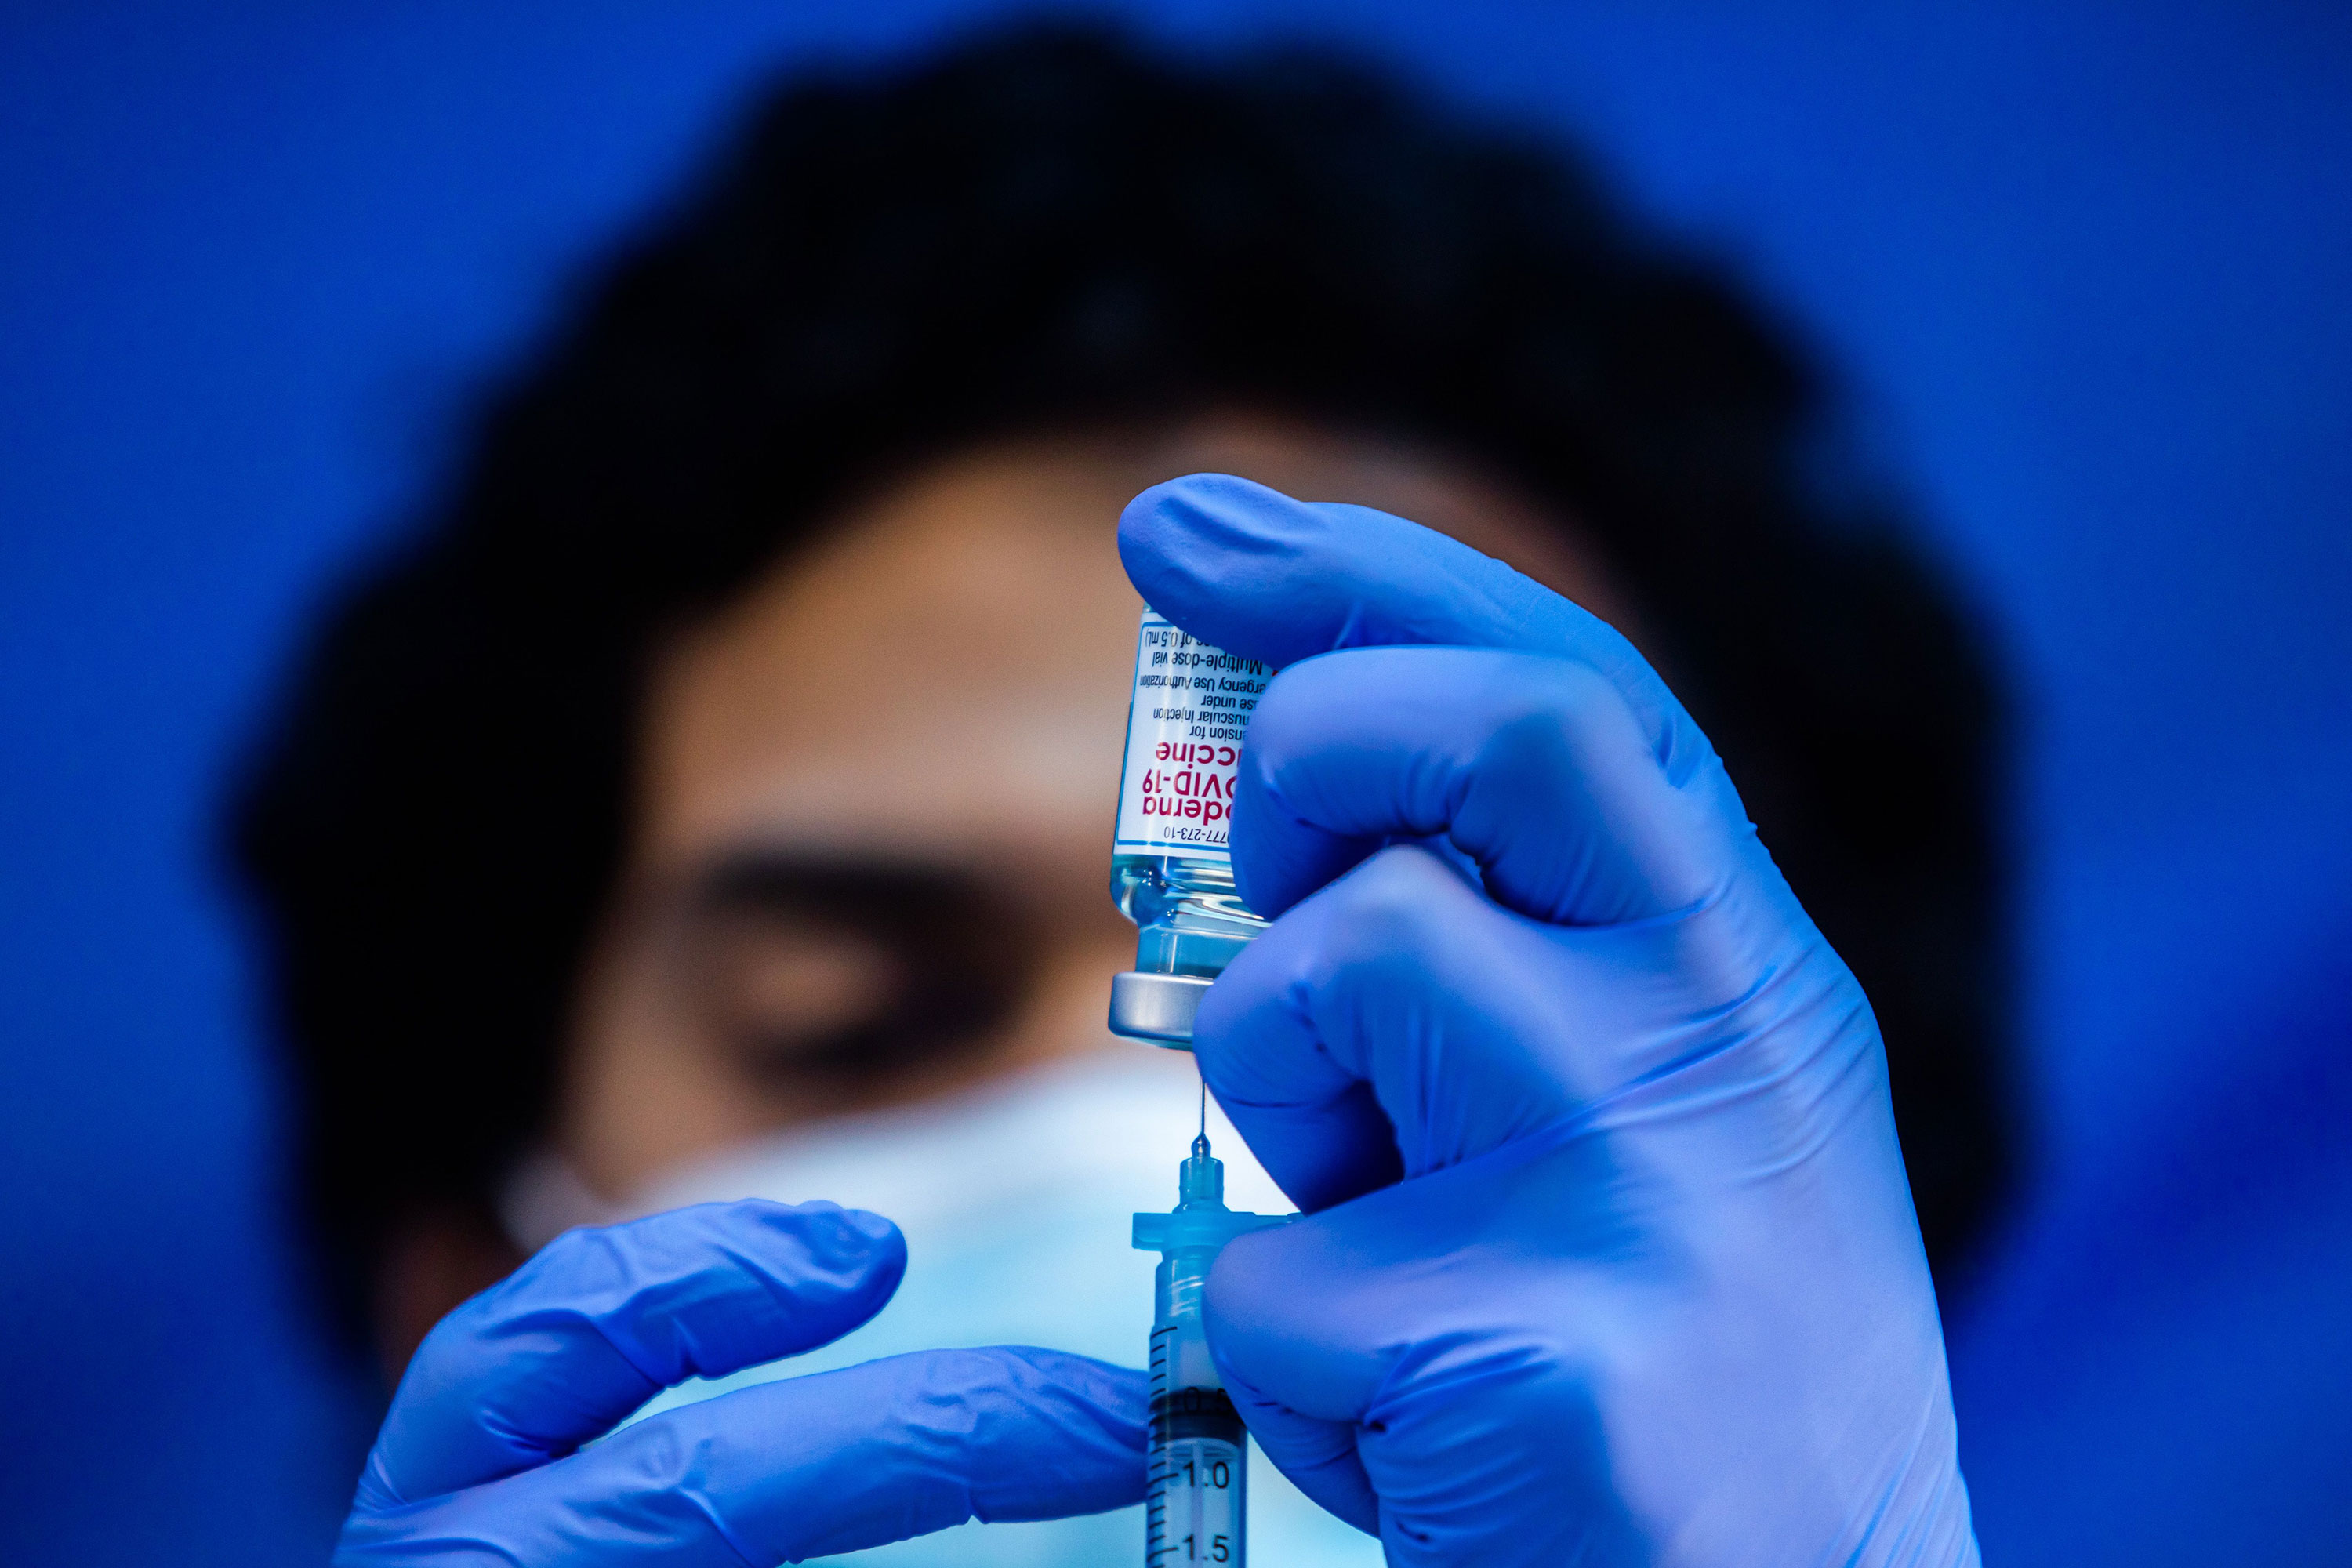 A medical worker loads a syringe with the Moderna Covid-19 vaccine at Kedren Community Health Center in Los Angeles on February 16.